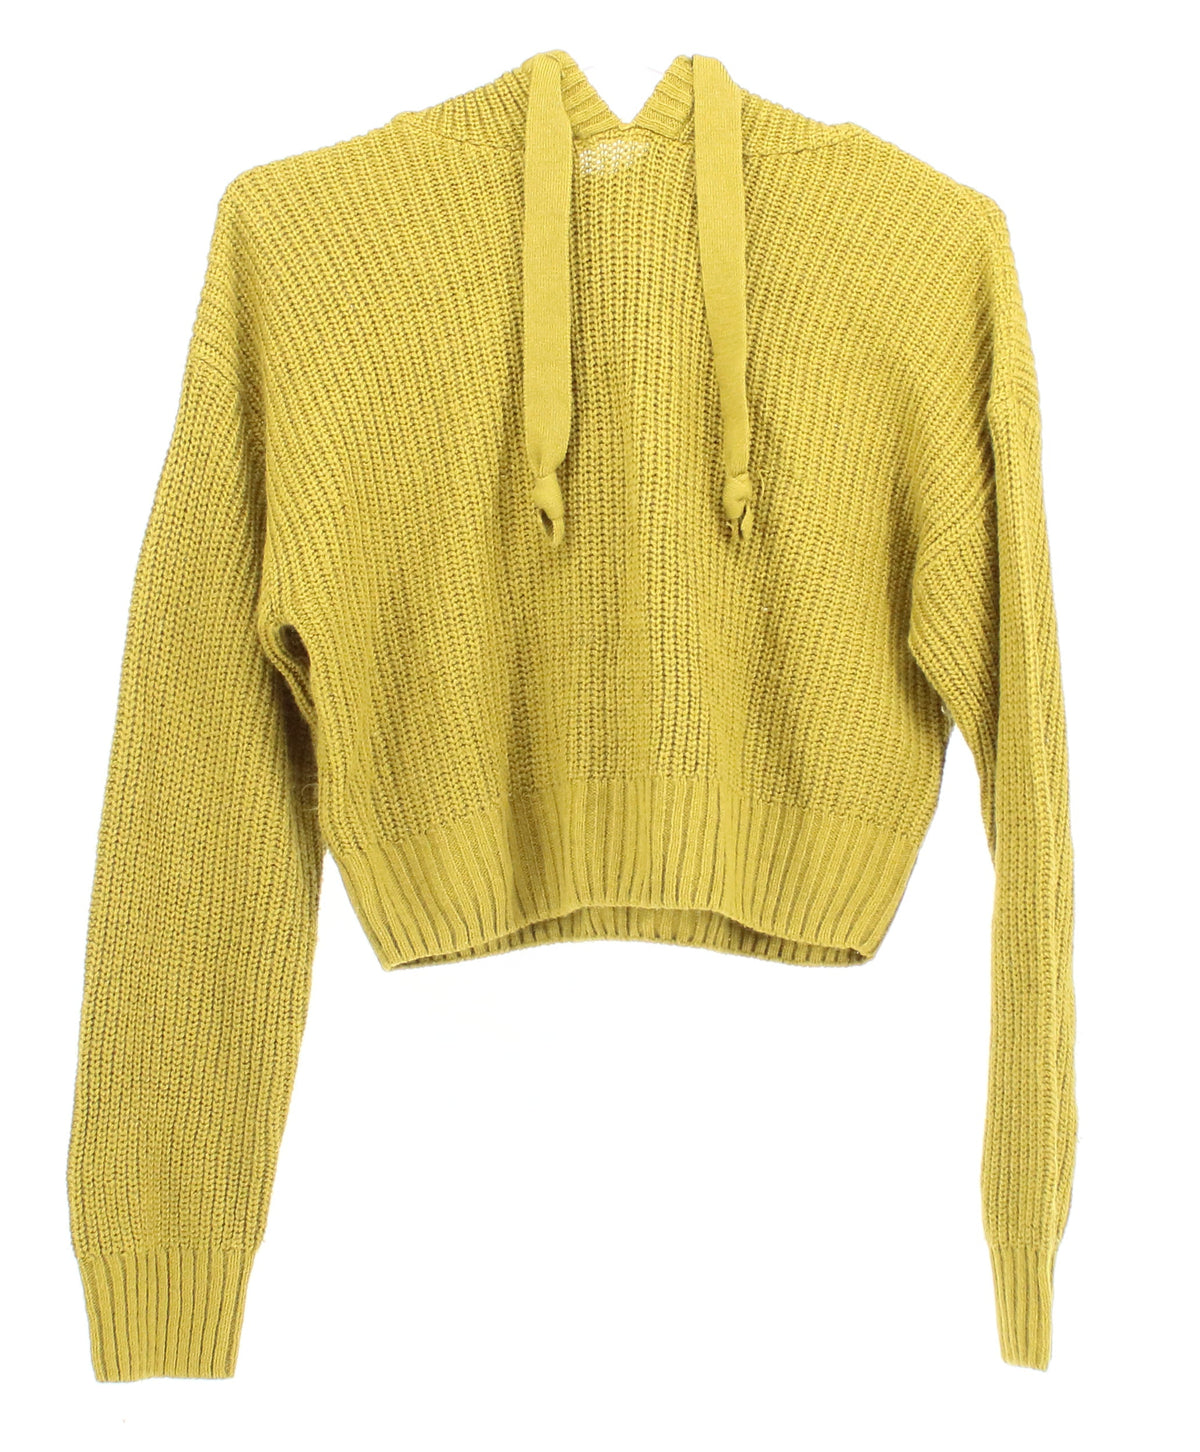 H&M Lime Green Cropped Hooded Women's Sweater